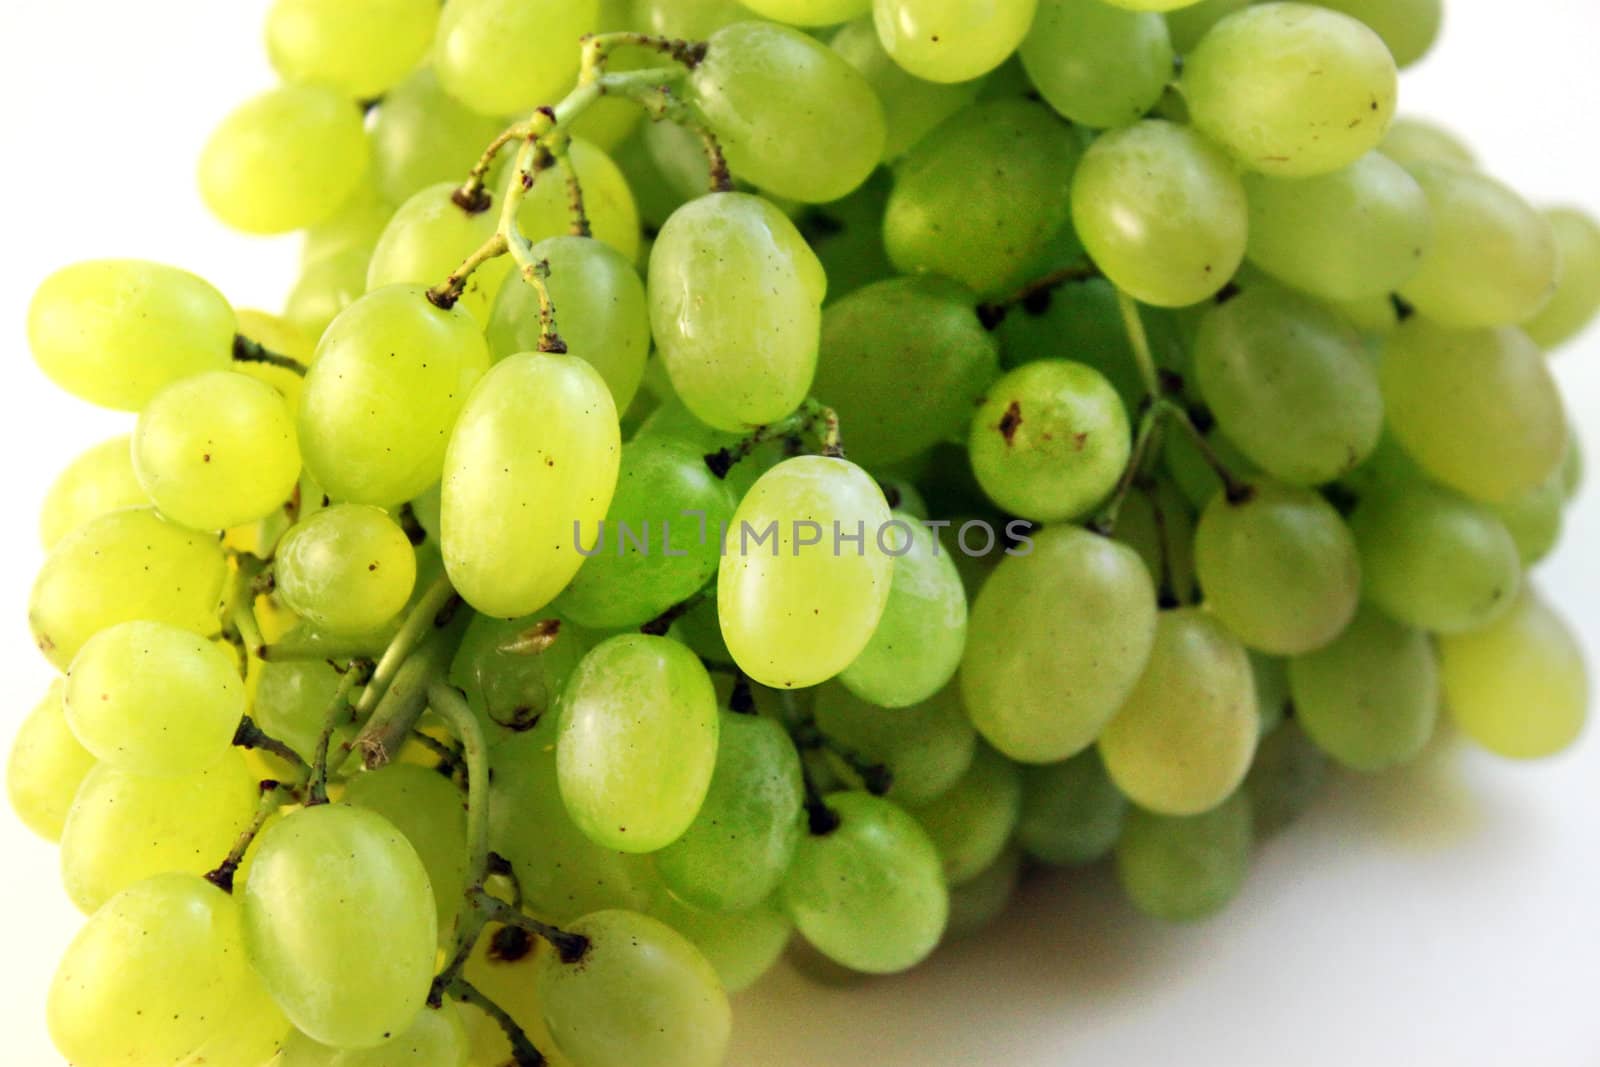 We see green Grapes on isolated white background